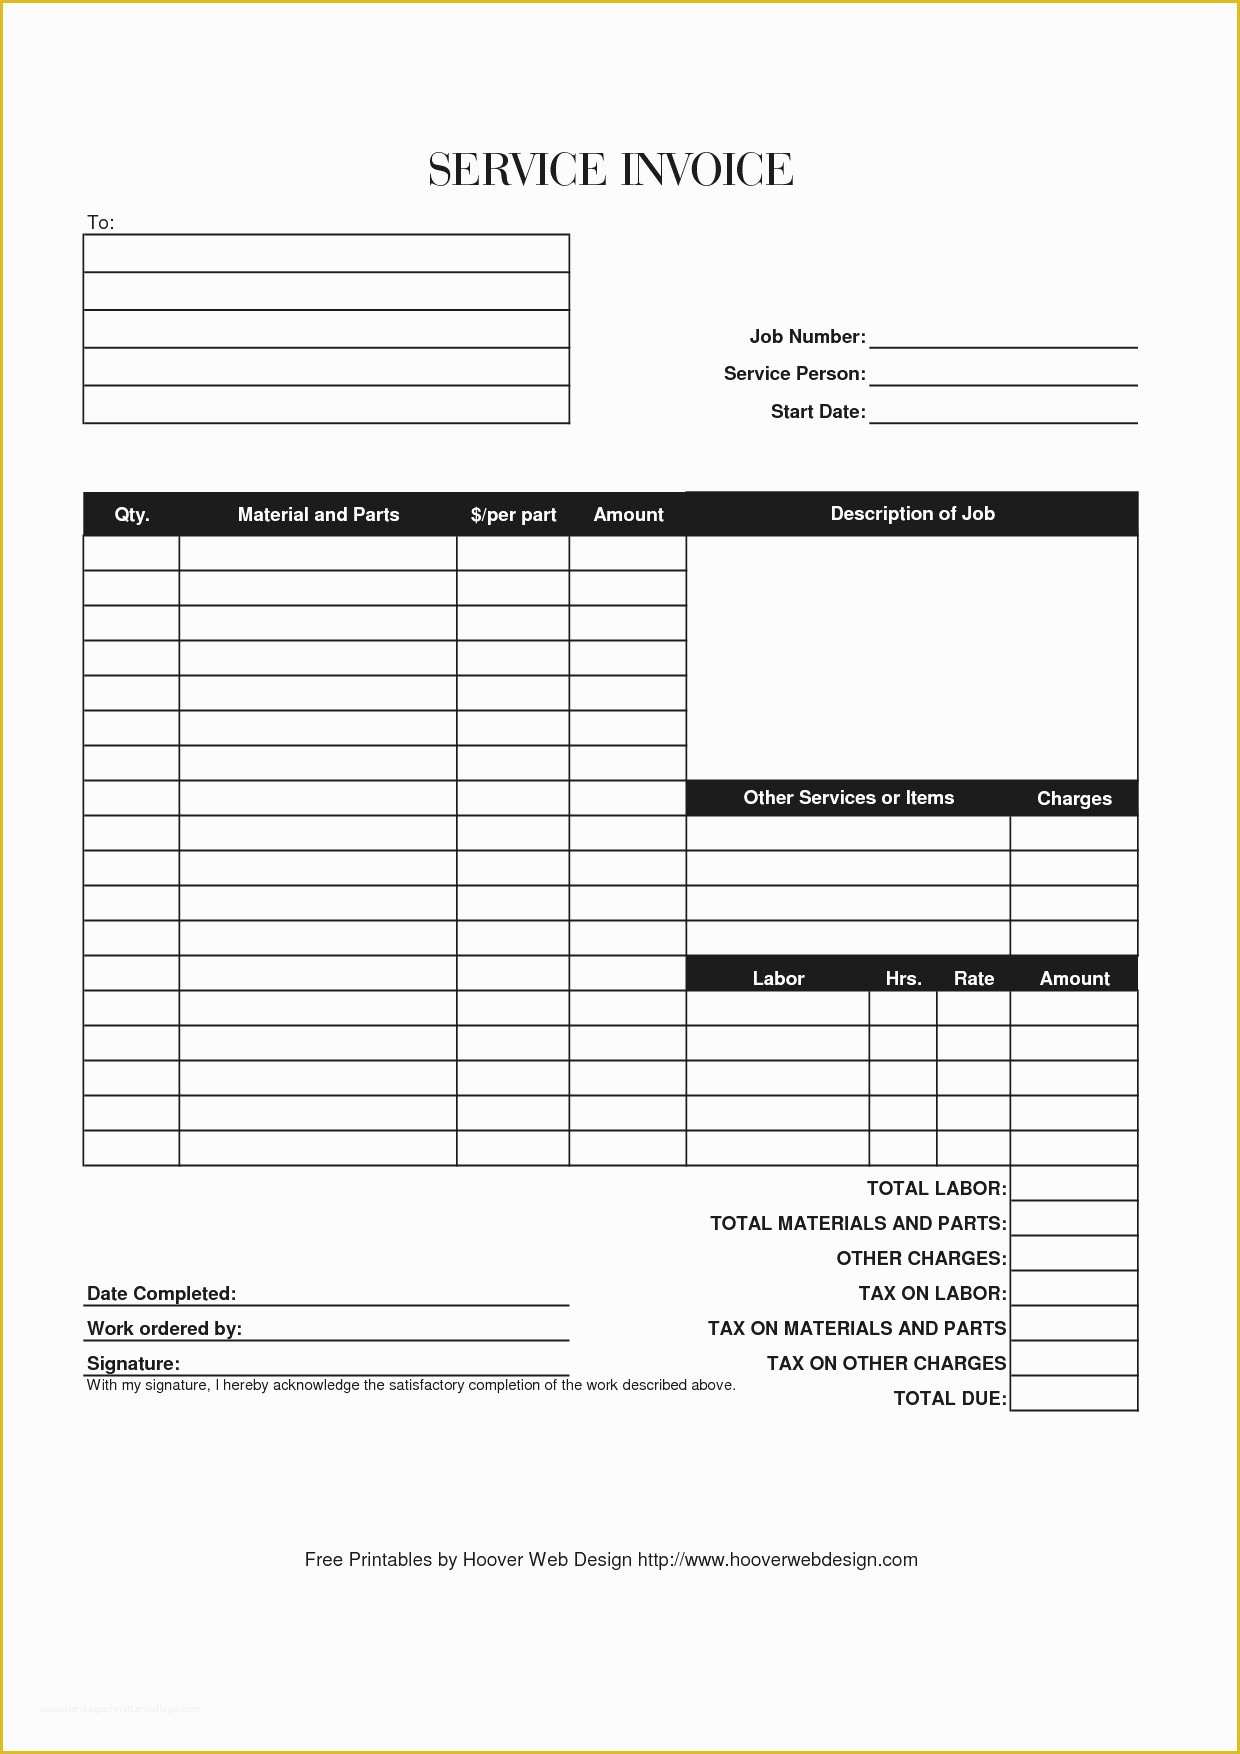 Free Printable Catering Invoice Template Of Free Printable Catering Invoice Template